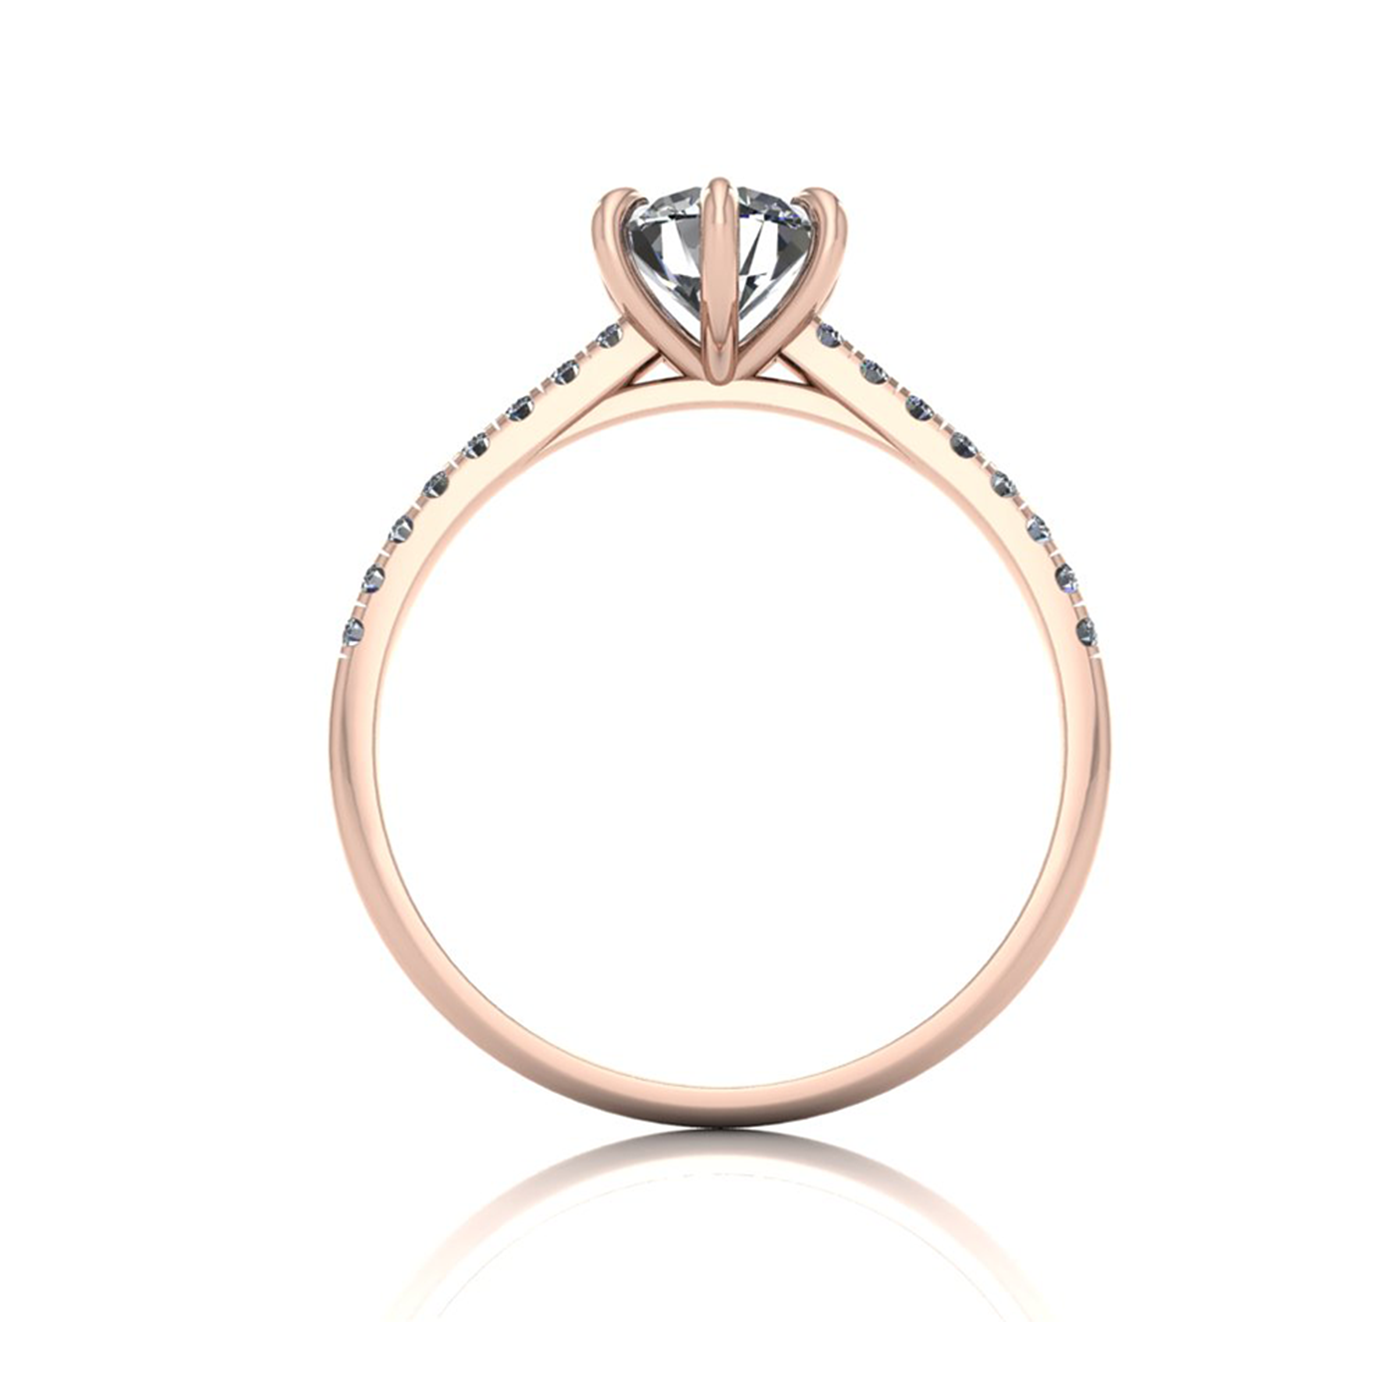 18k rose gold 0,80 ct 6 prongs round cut diamond engagement ring with whisper thin pavÉ set band